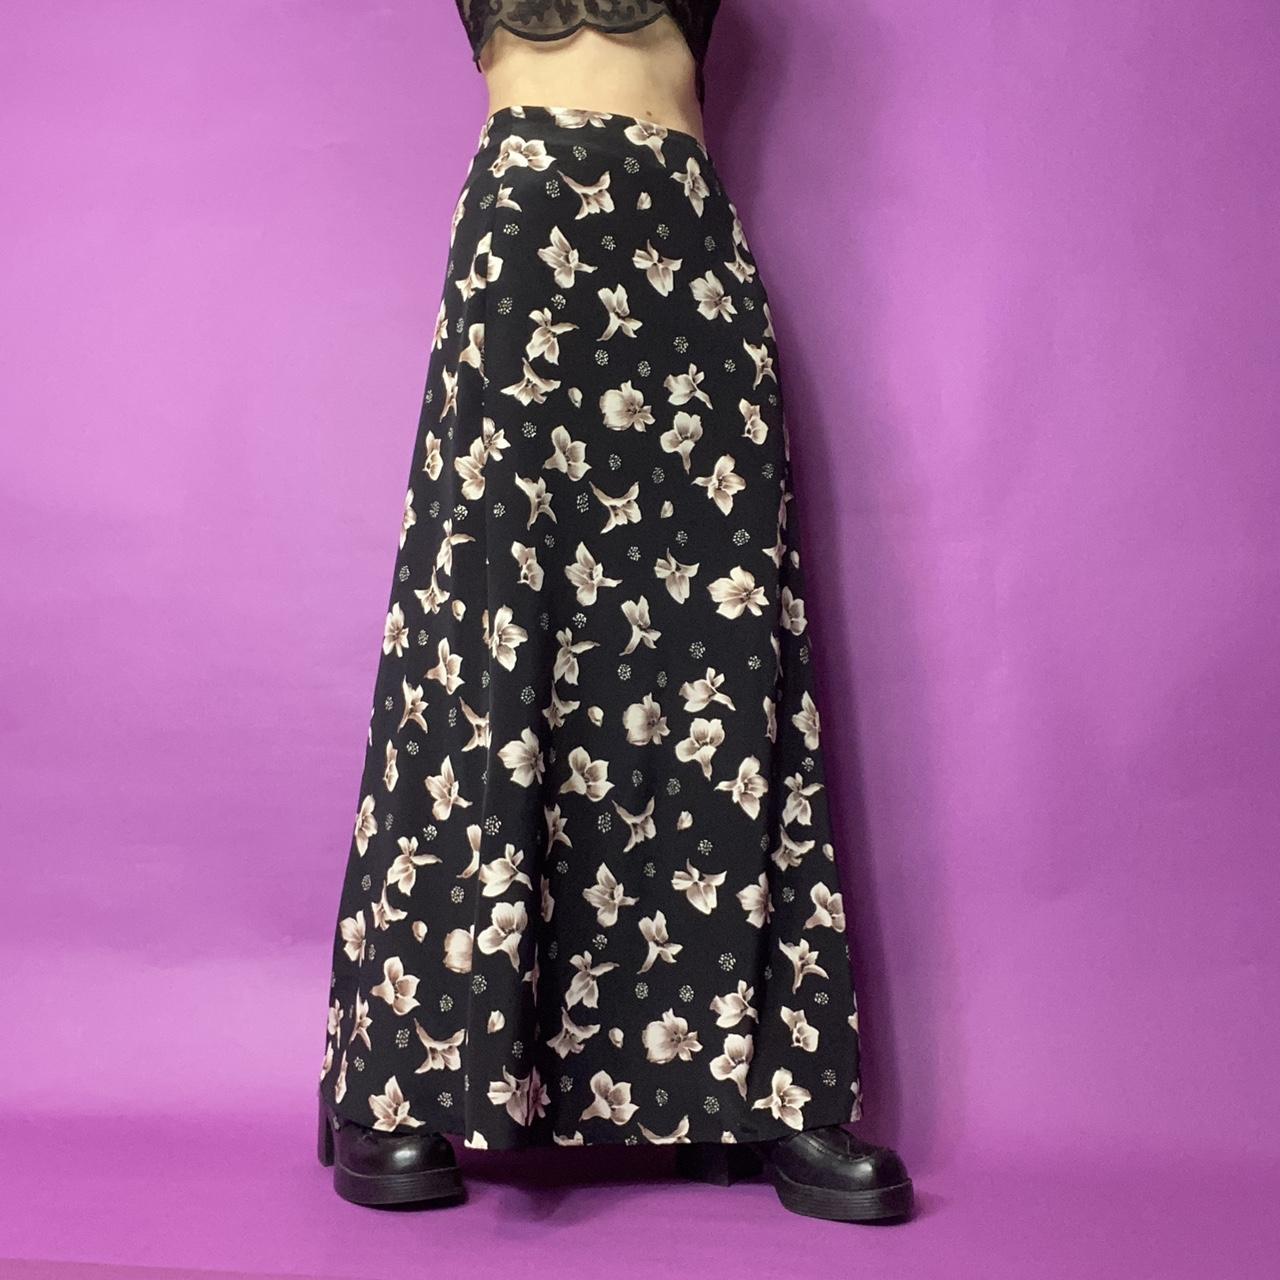 Product Image 1 - 90s floral midi skirt

by Joule